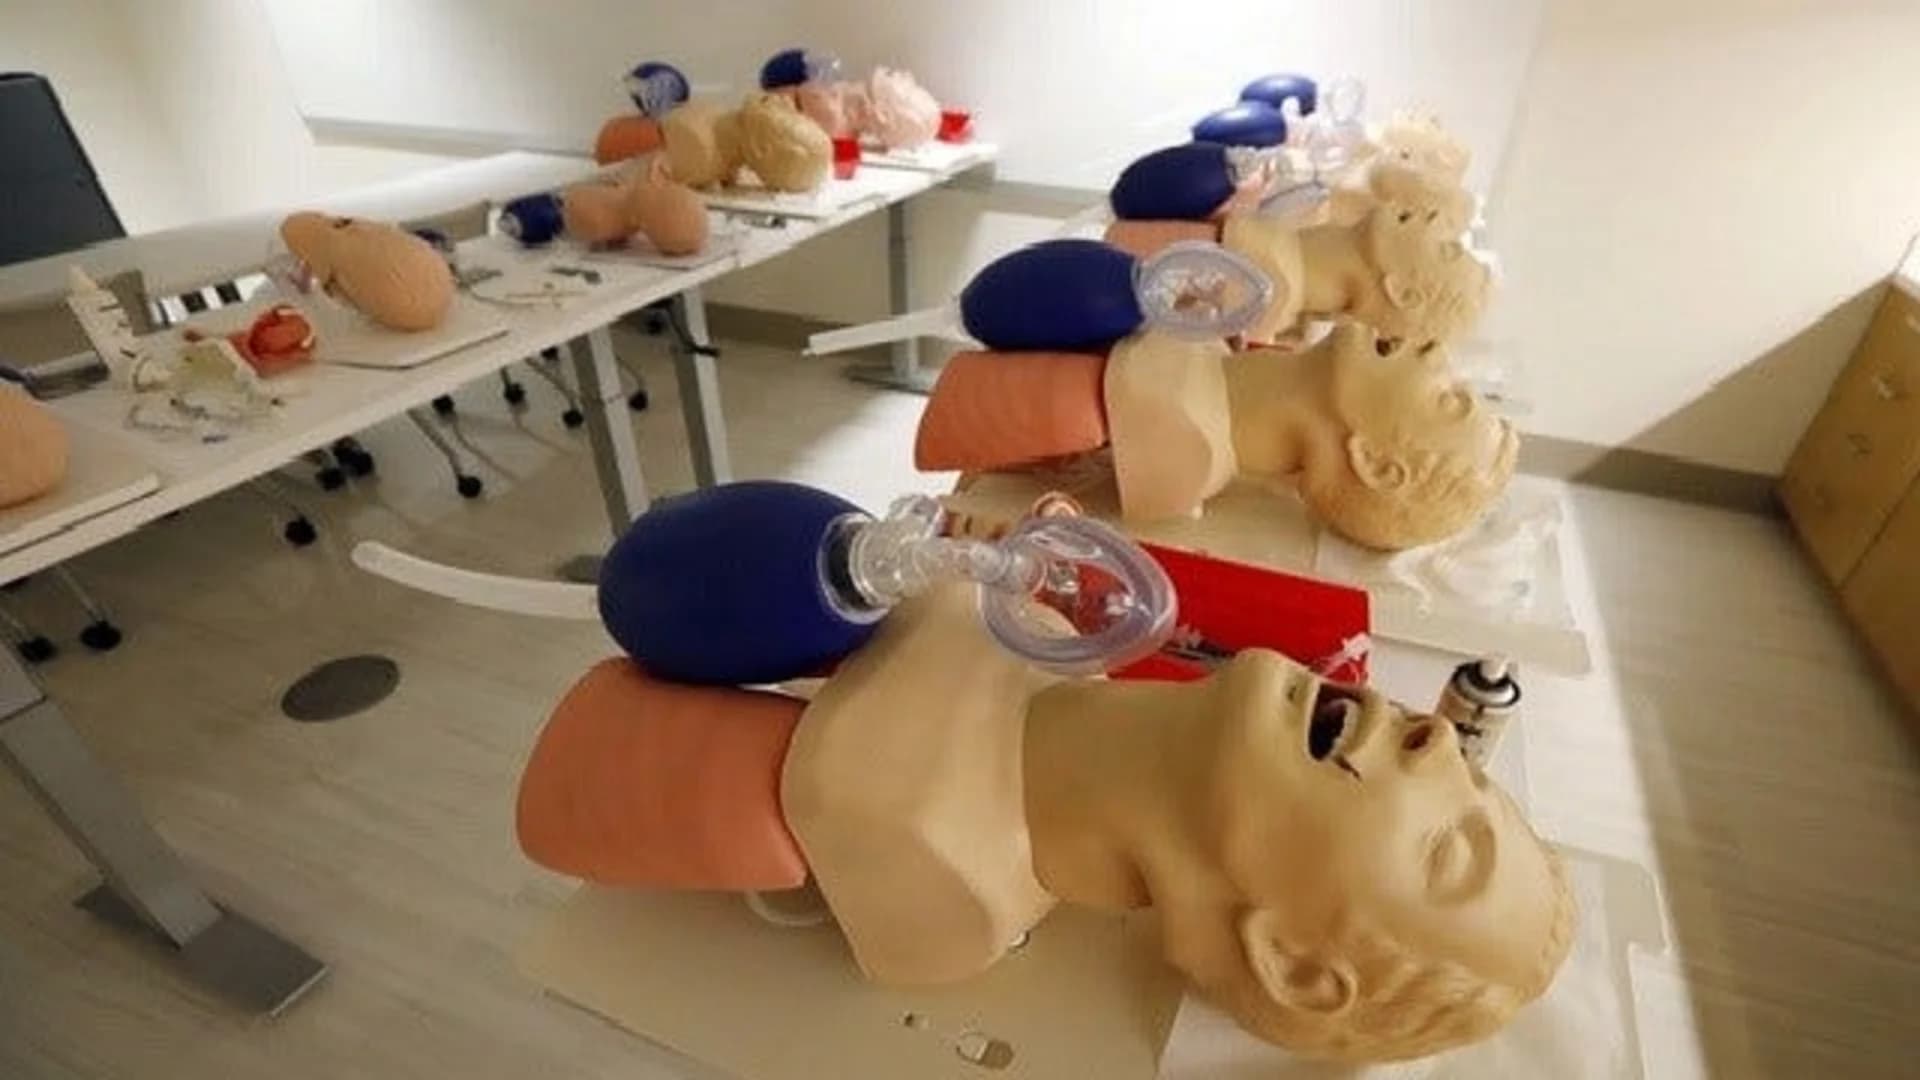 Study suggests women less likely to get CPR from bystanders